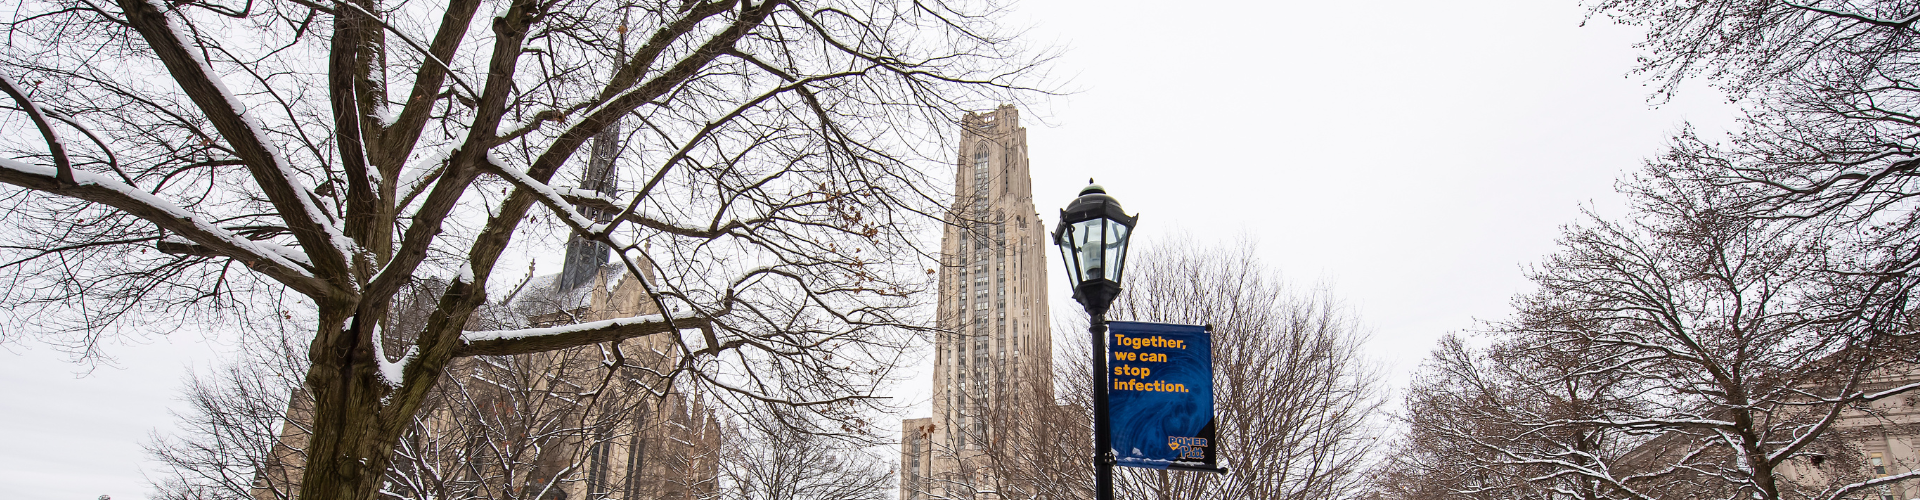 the Cathedral of Learning on a snowy day, with a bare tree and a Pitt banner in the foreground